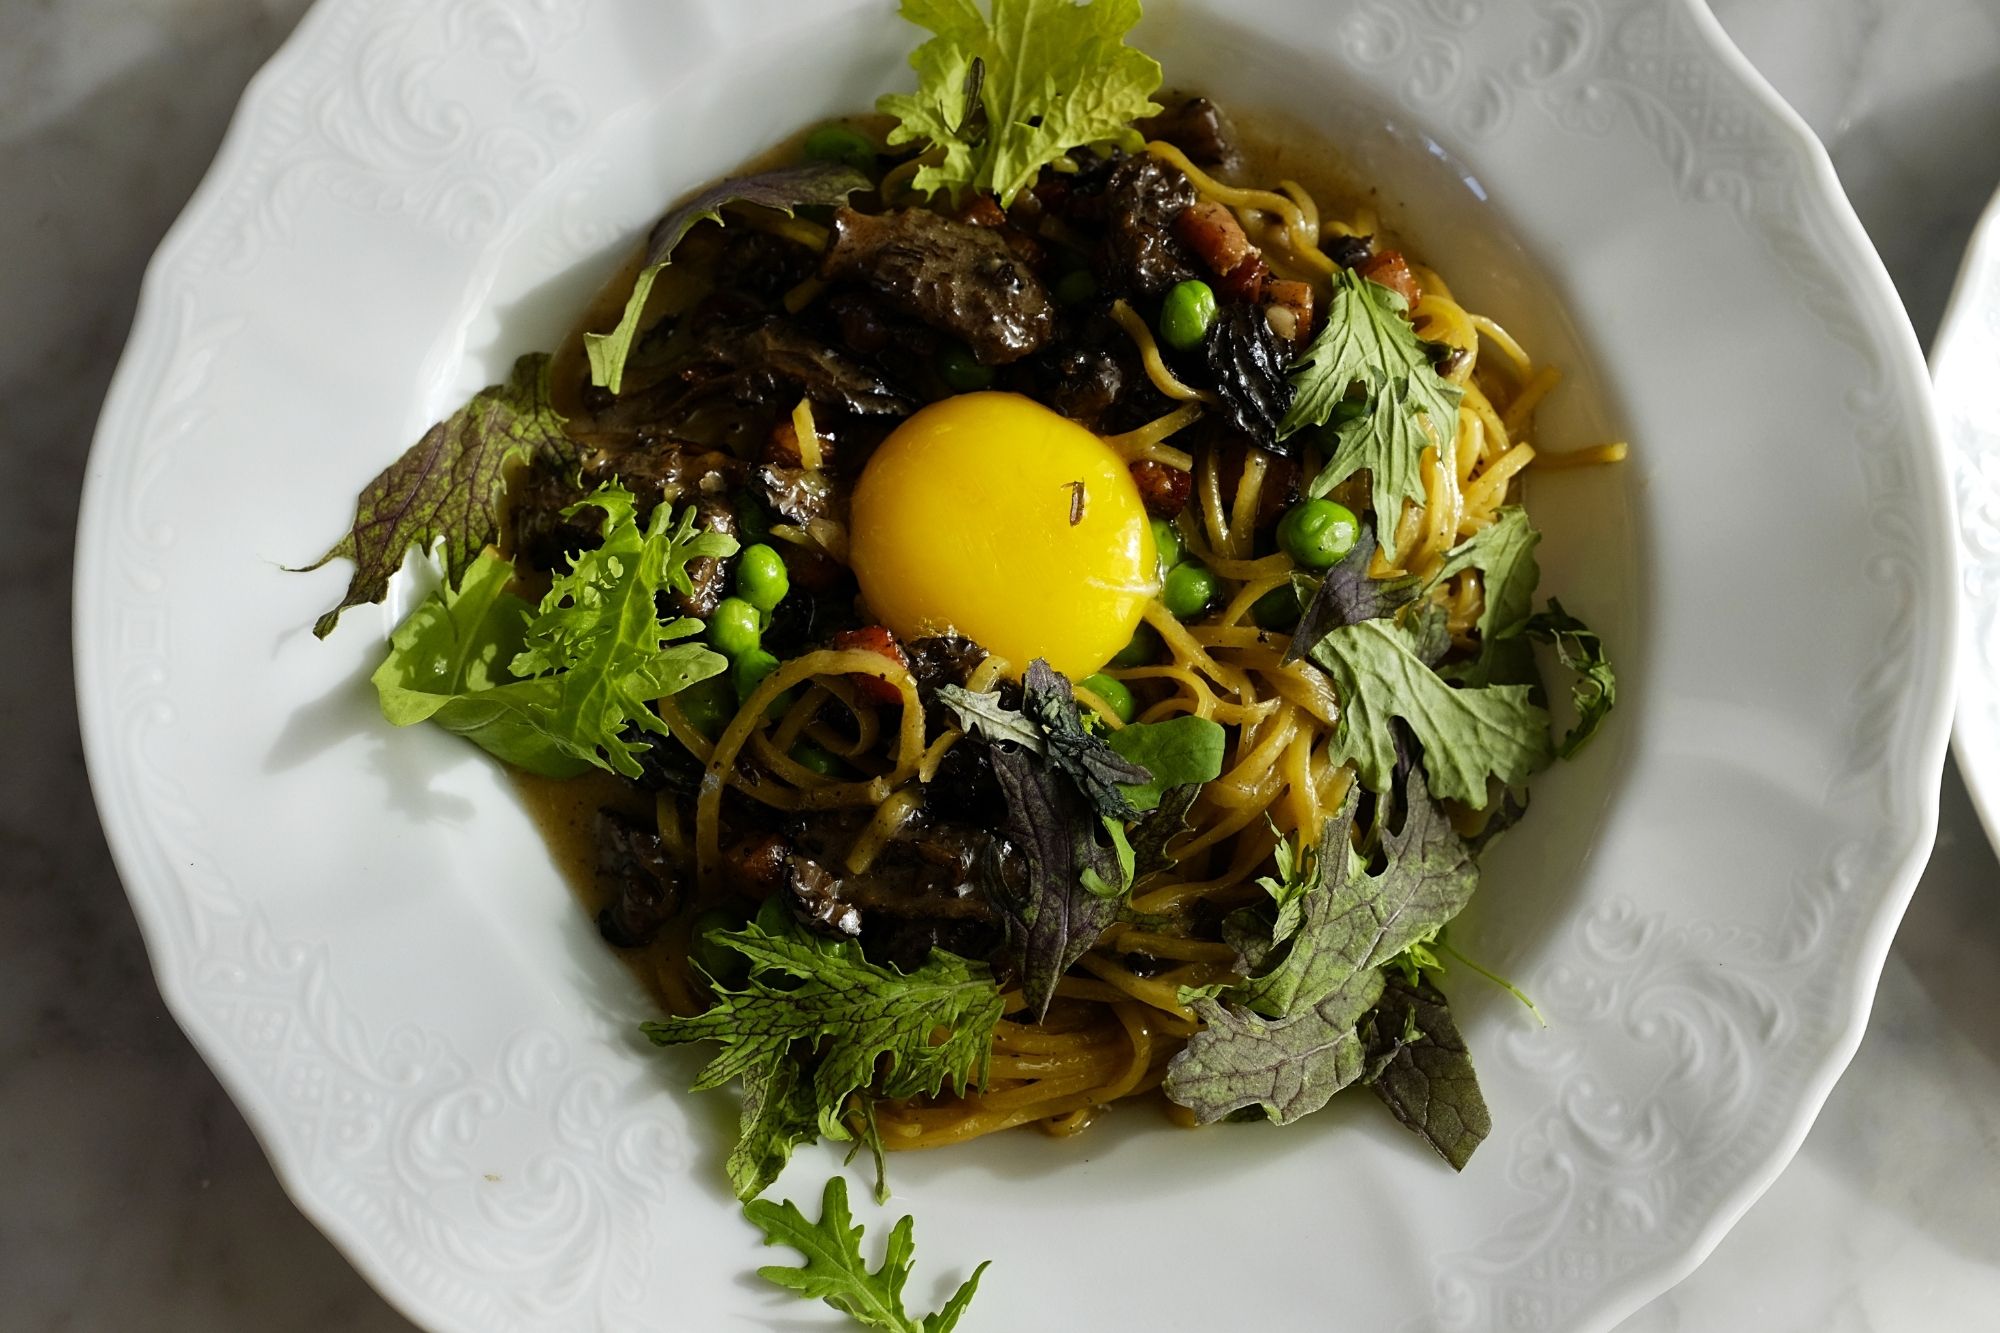 A bowl of tagliolini with greens and an egg yolk